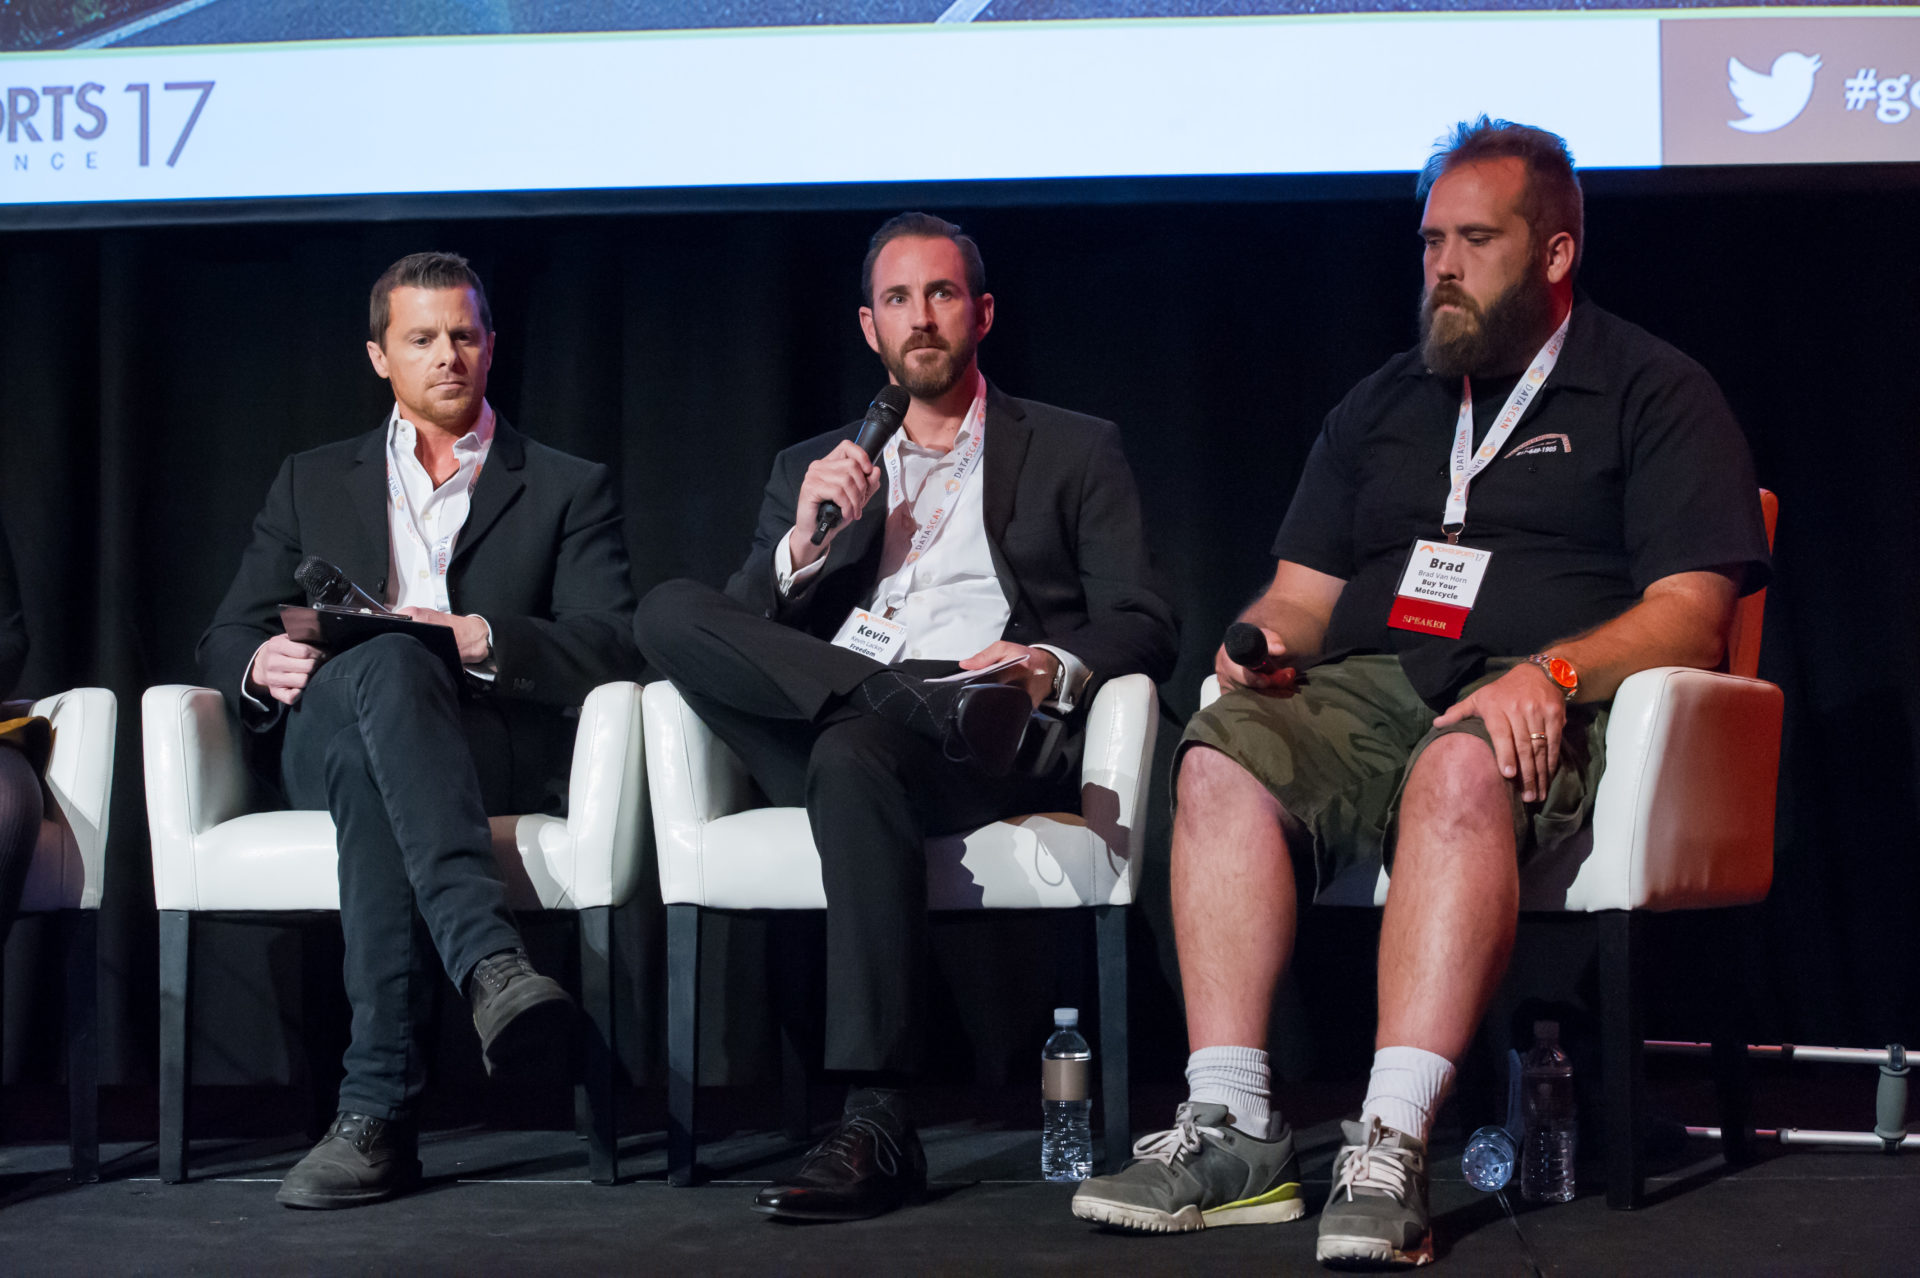 Pictured, from left: Chris Clovis, owner and operator, Freedom EuroCycle; Kevin Lackey, president and CEO, Freedom Powersports; and Bradley Van Horn, owner, Buy Your Motorcycle, discuss F&I in a panel discussion at PowerSports Finance 2017.